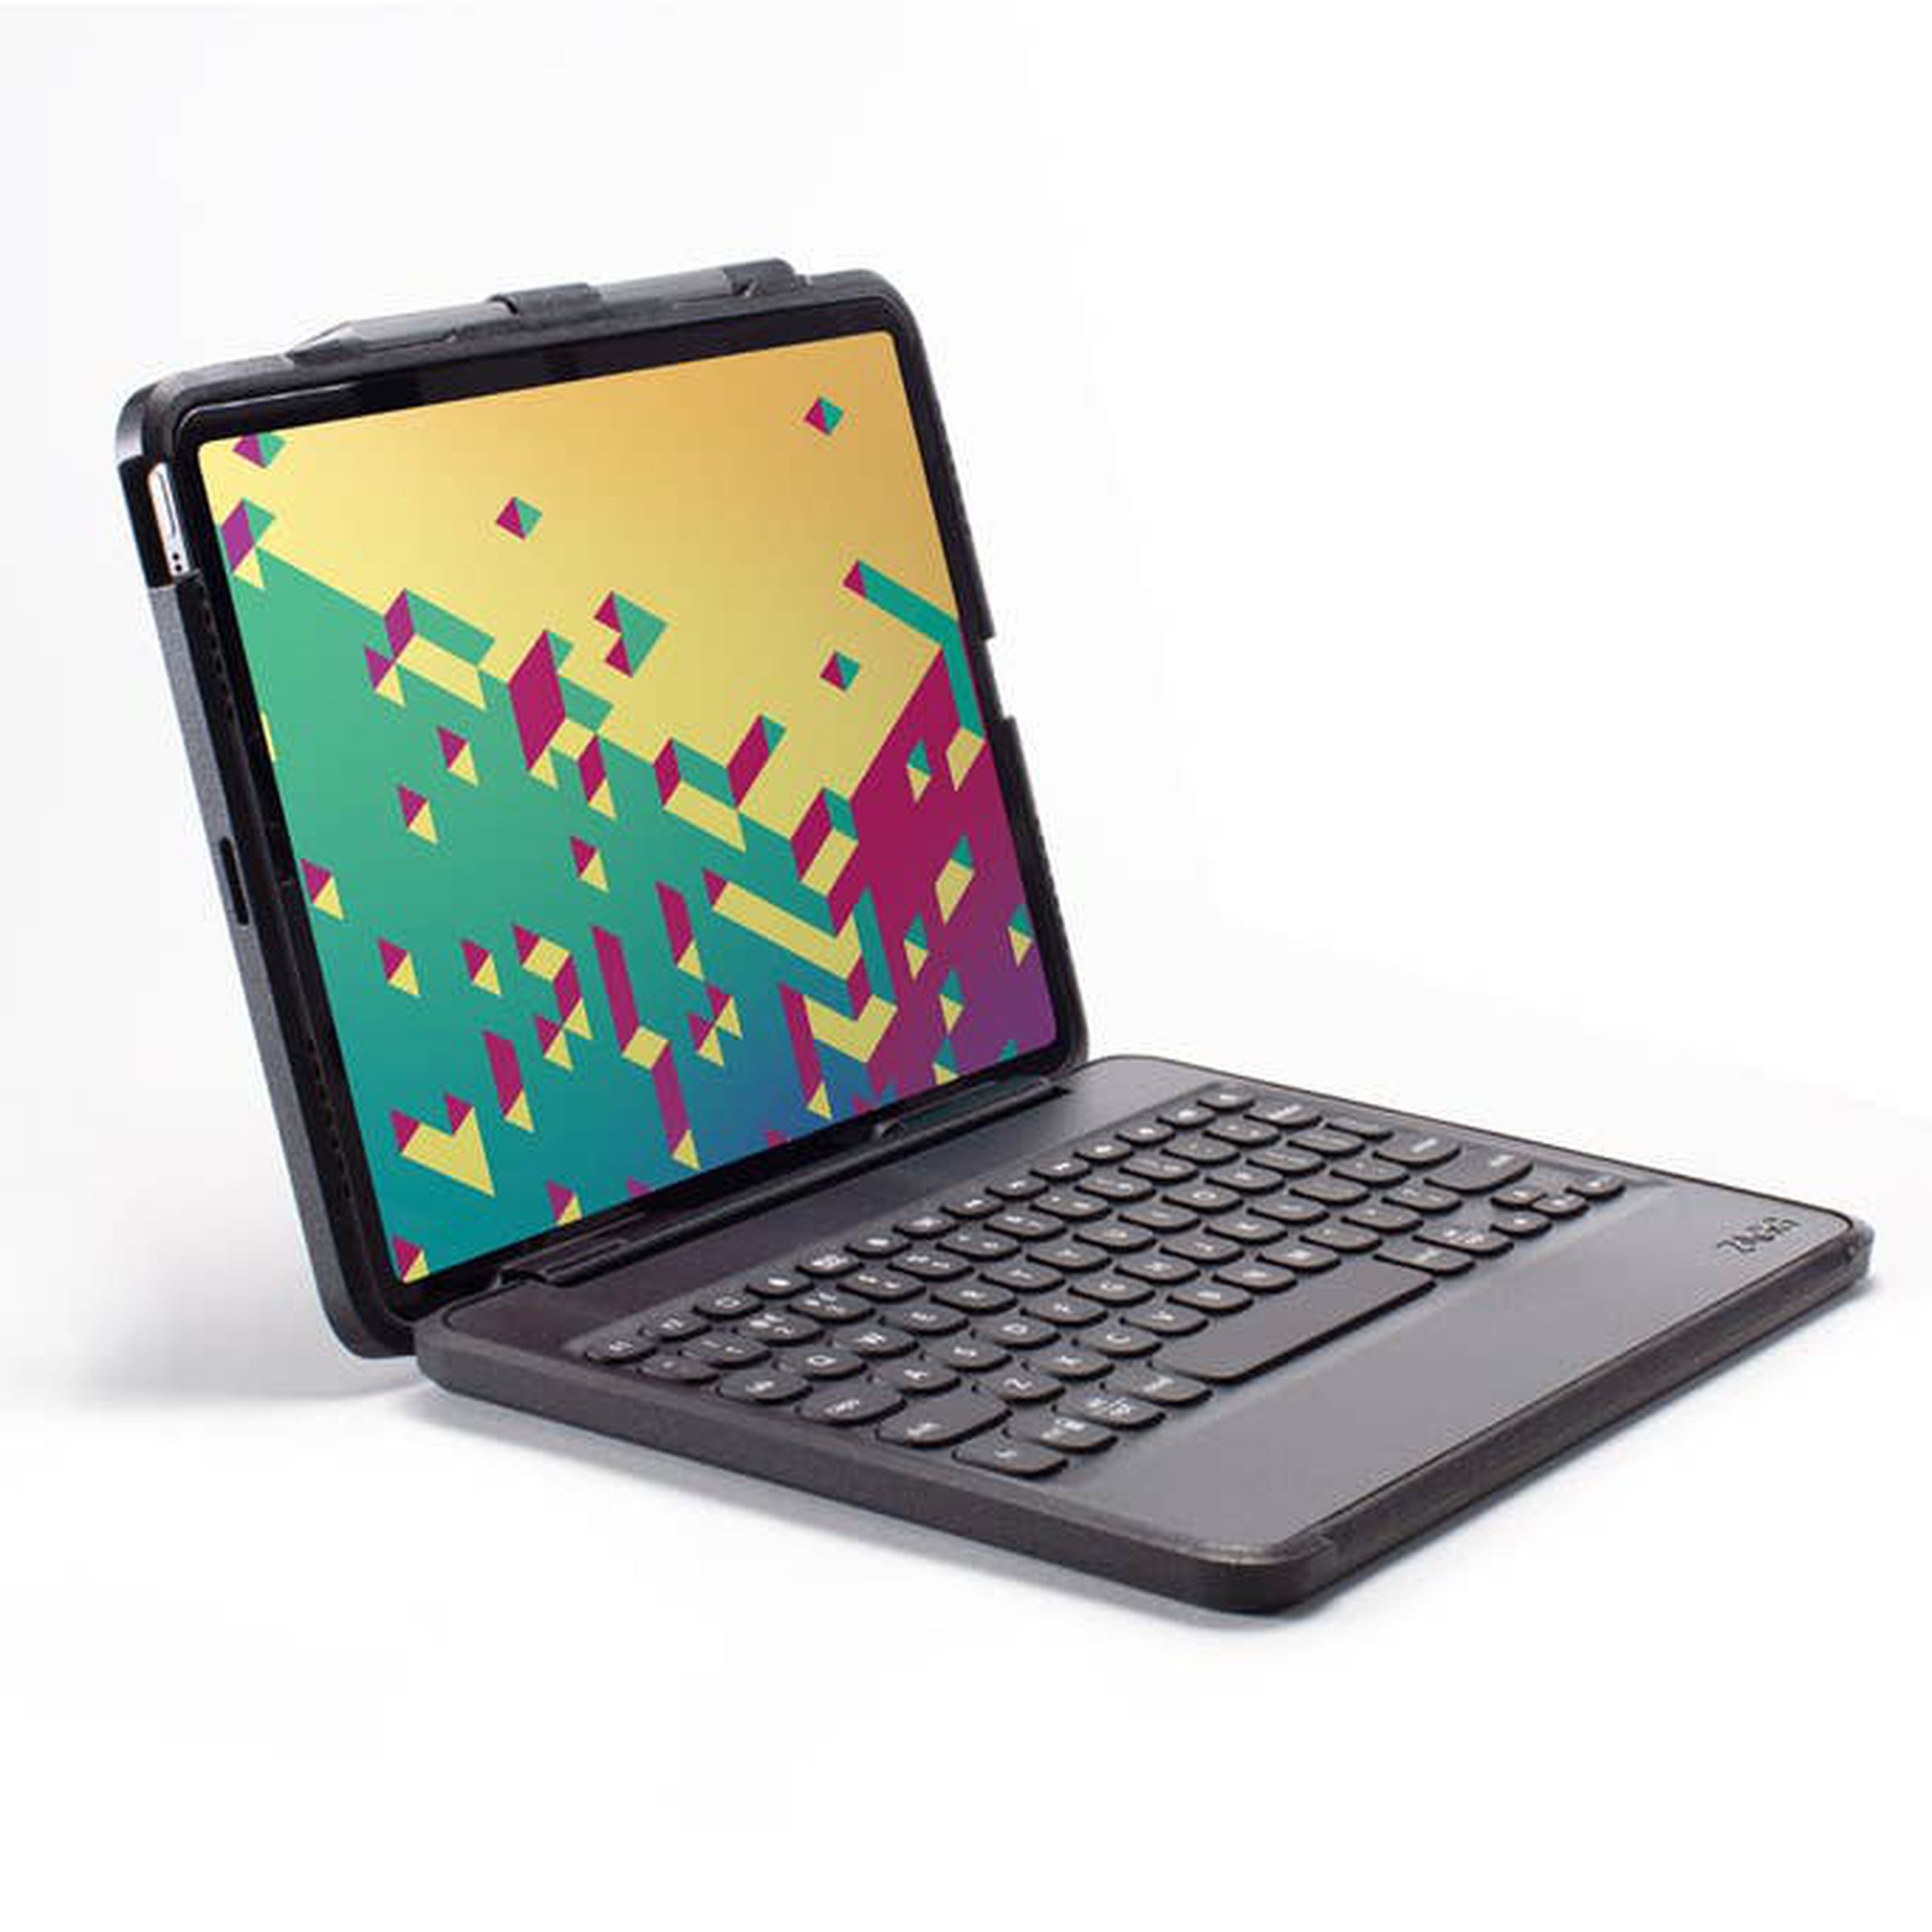 Zagg’s Rugged Book has better drop protection, but lacks a trackpad.